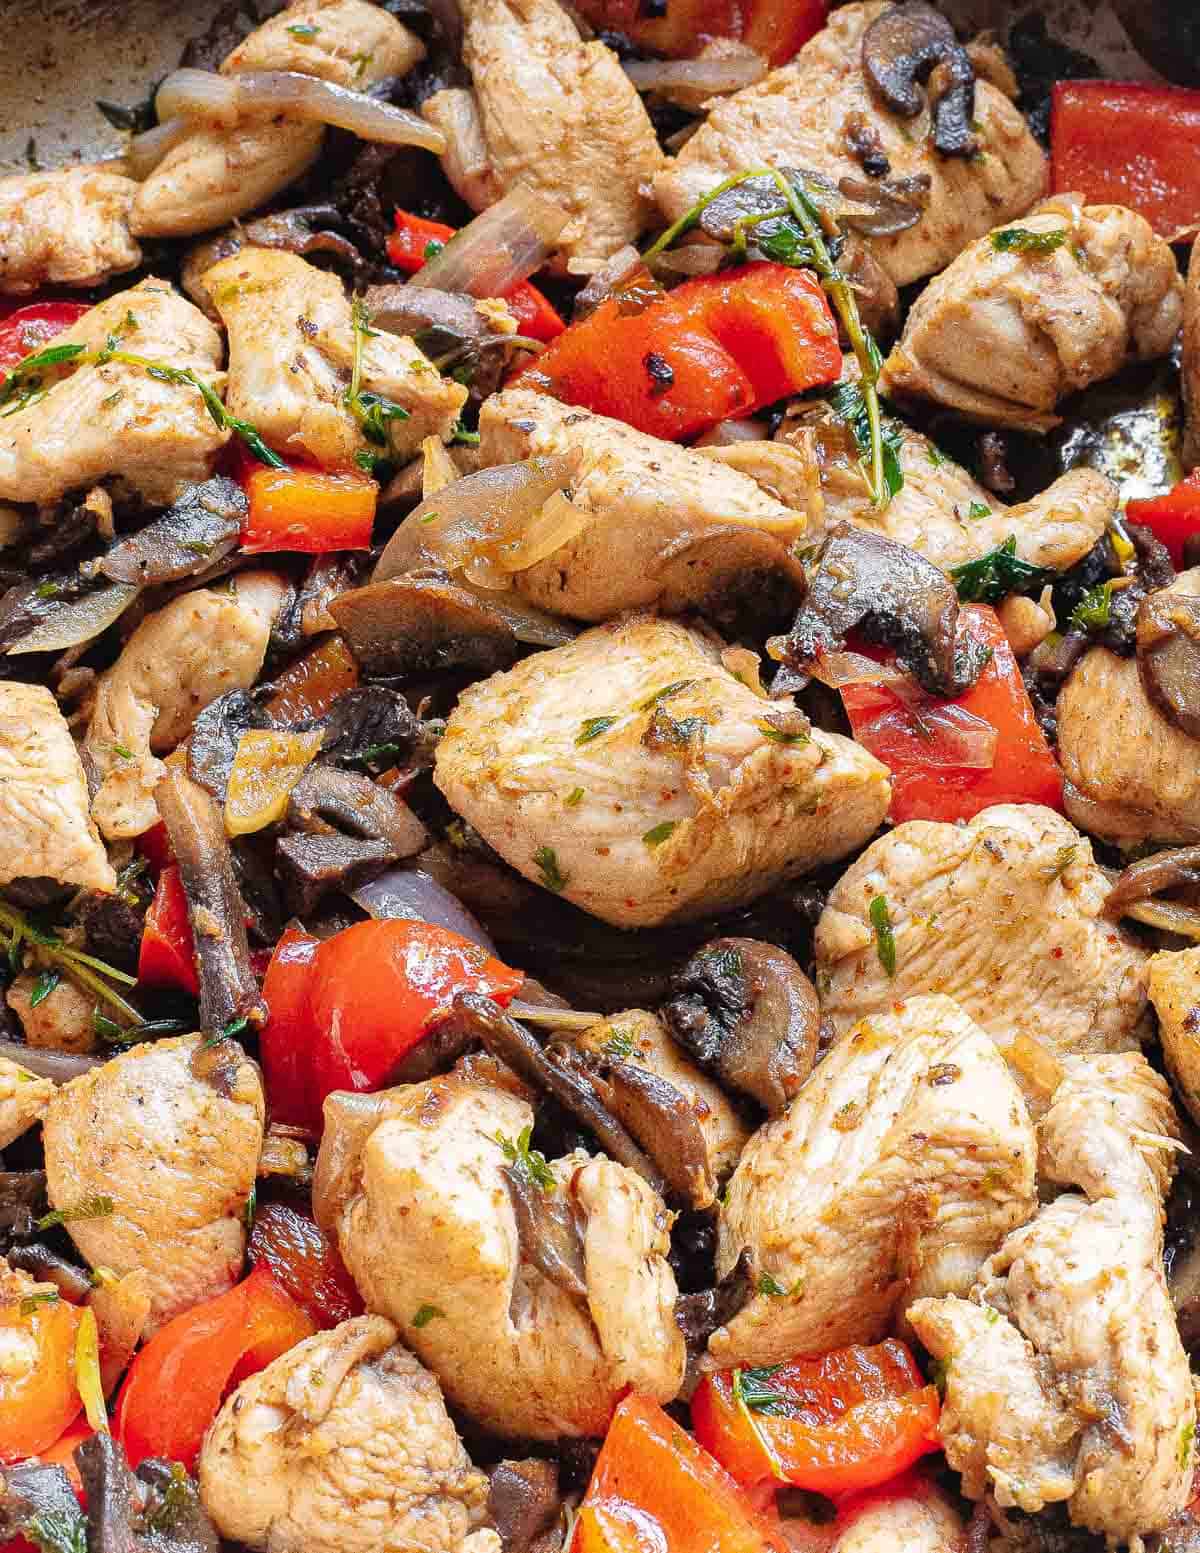 Browned chicken breast bites in a skillet with red bell peppers, mushrooms, onions and fresh herbs.